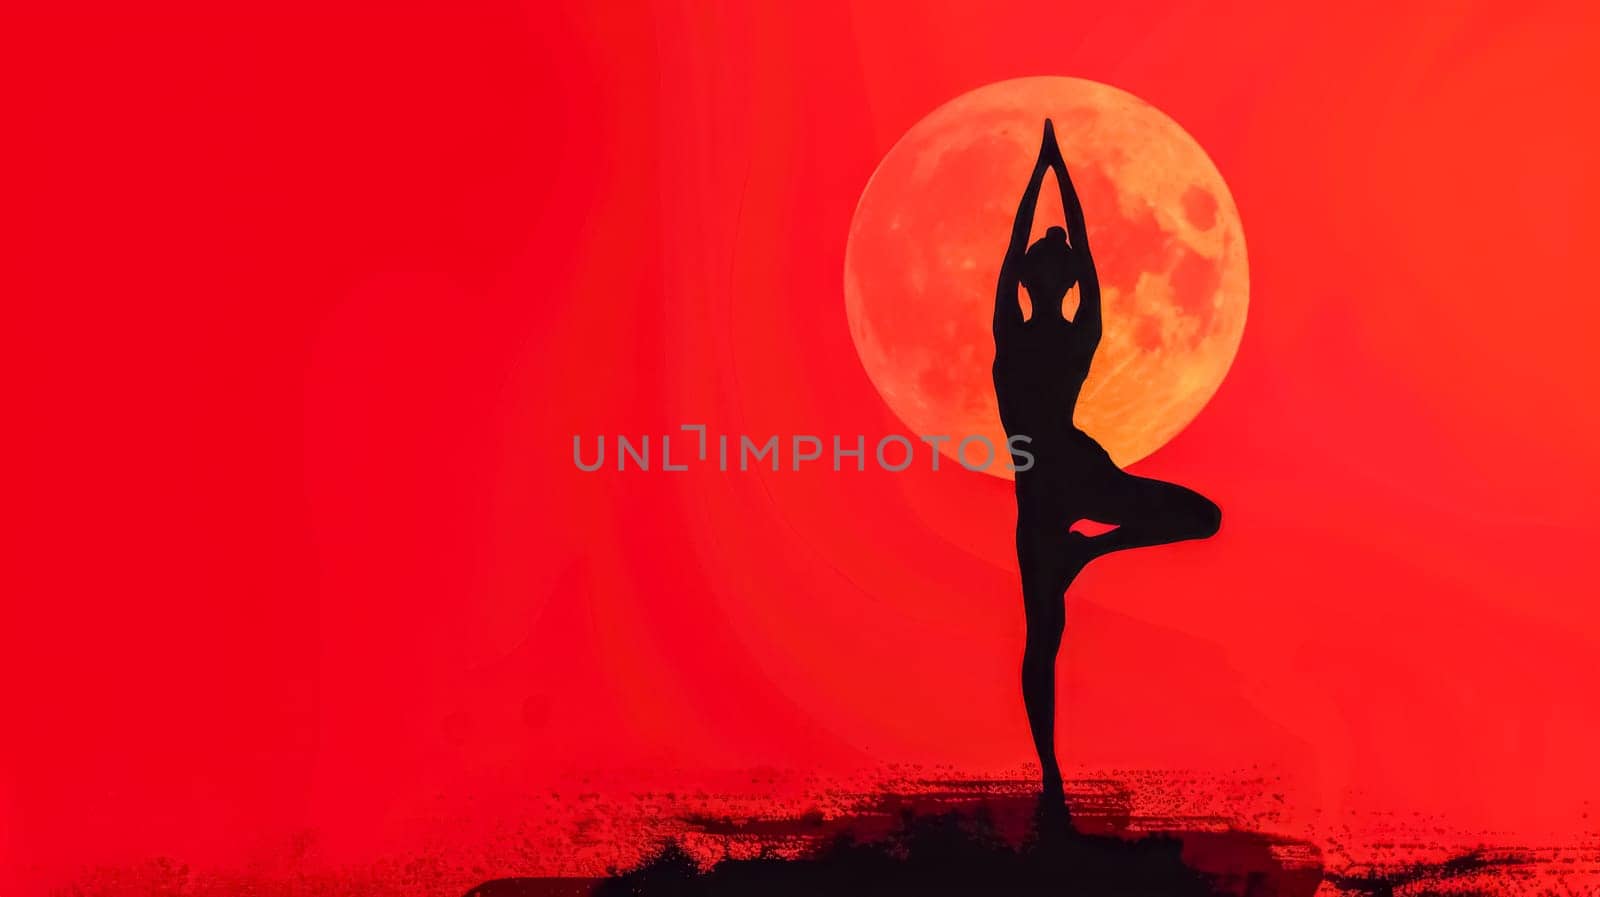 Tranquil yoga pose silhouette against a vibrant red sunset and full moon